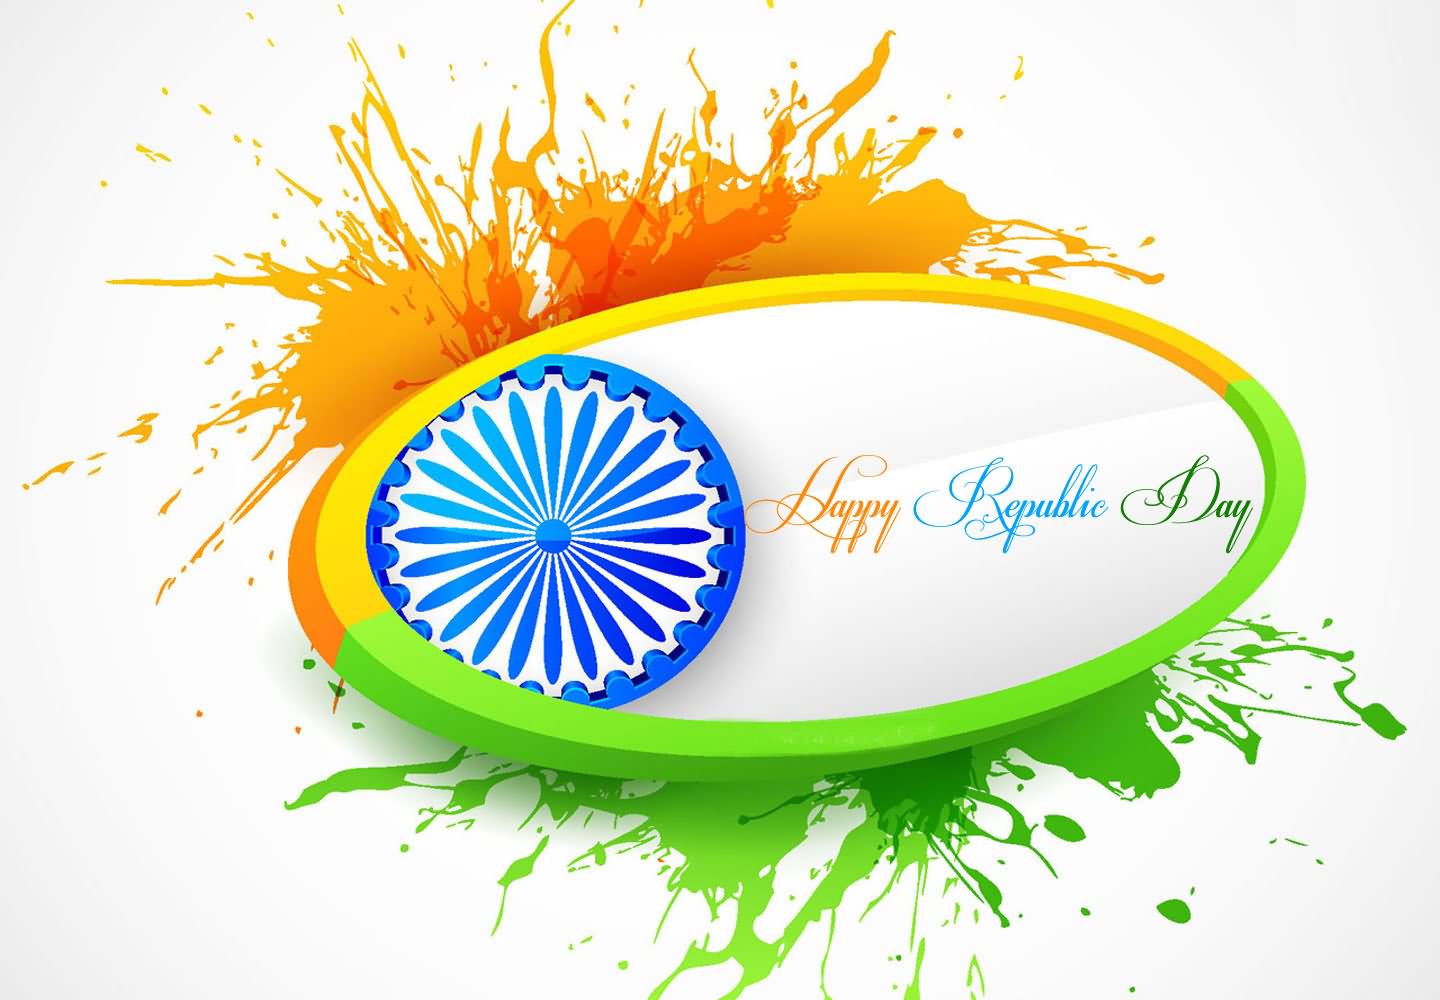 21 Wonderful Republic Day Wishes Pictures